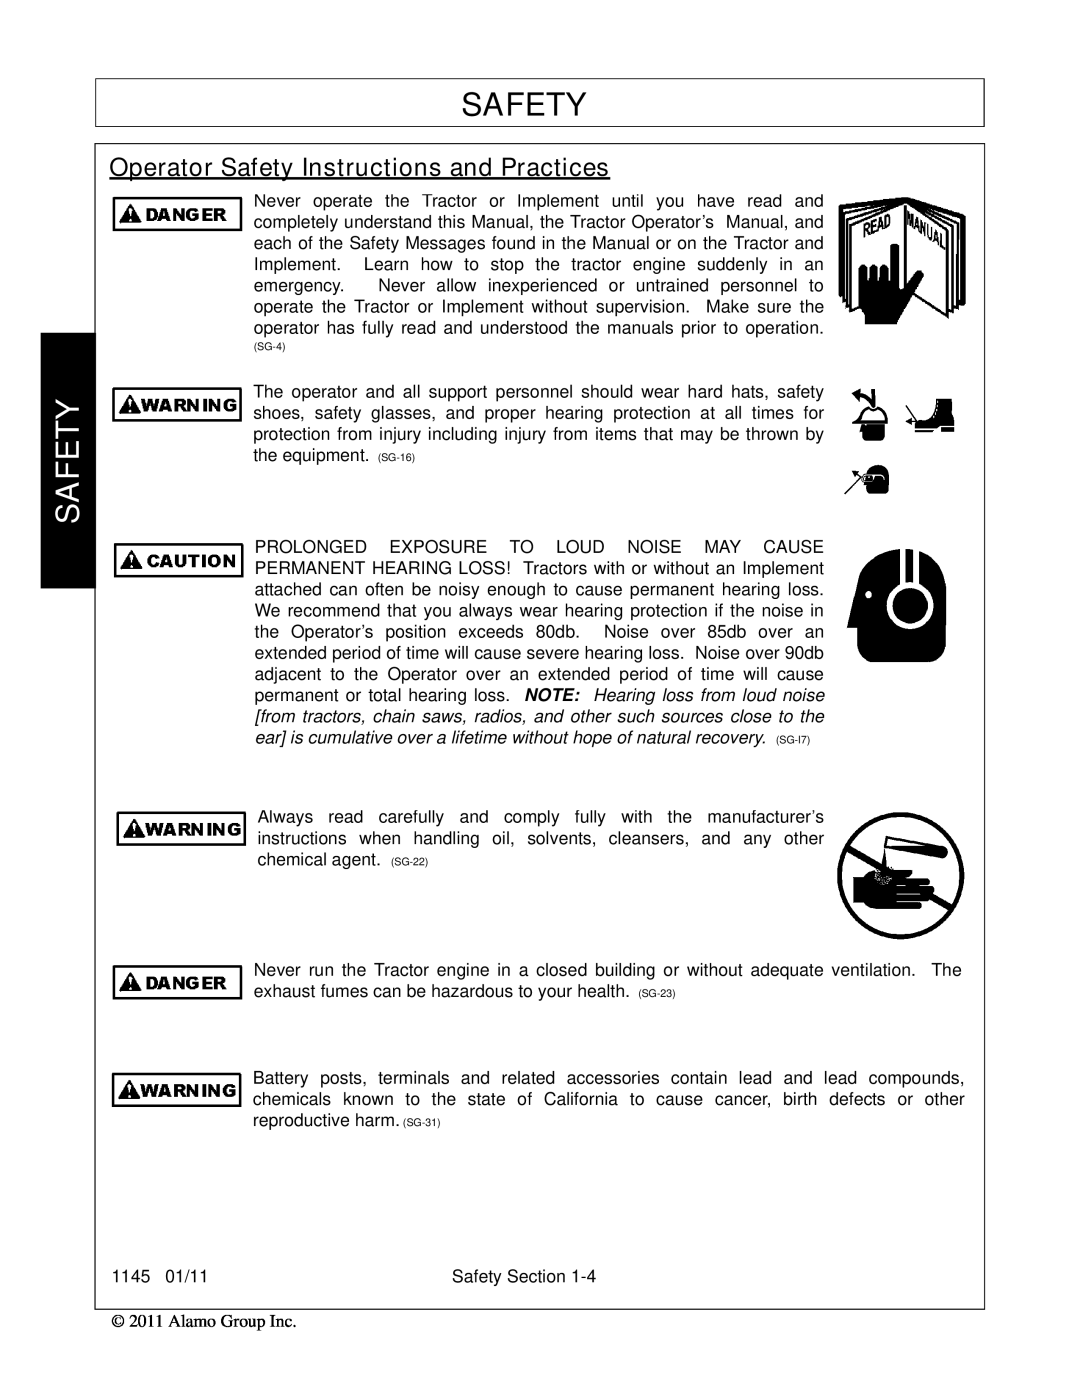 Bush Hog 1145 manual Operator Safety Instructions and Practices, SG-4 